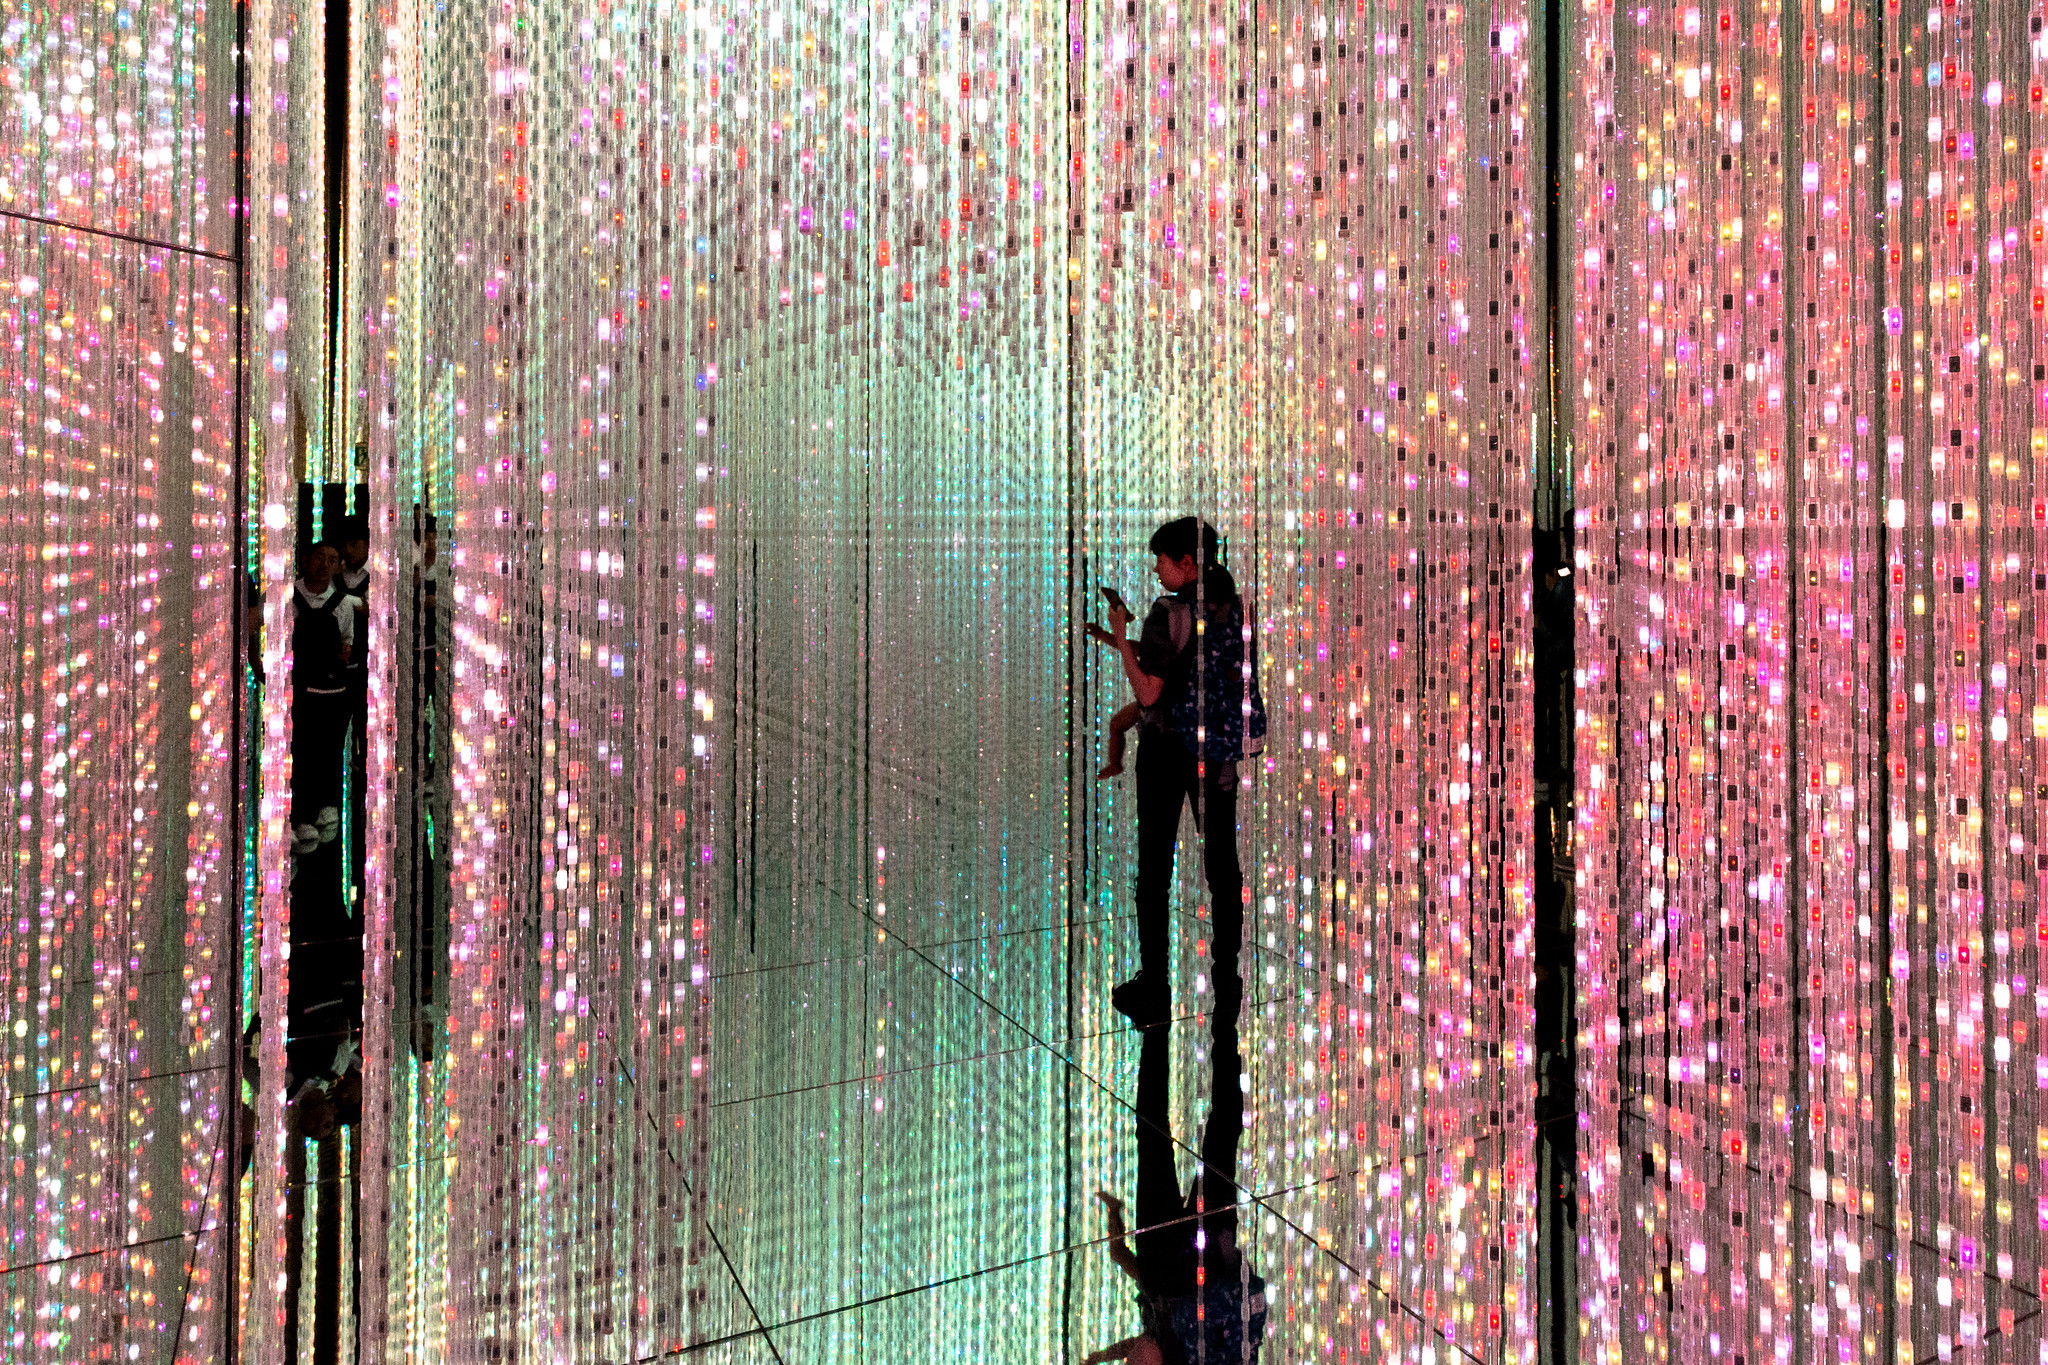 Visitors interacting with the Forest of Resonating Lamps at TeamLab Borderless, featuring multicolored, illuminated lamps hanging from the ceiling.